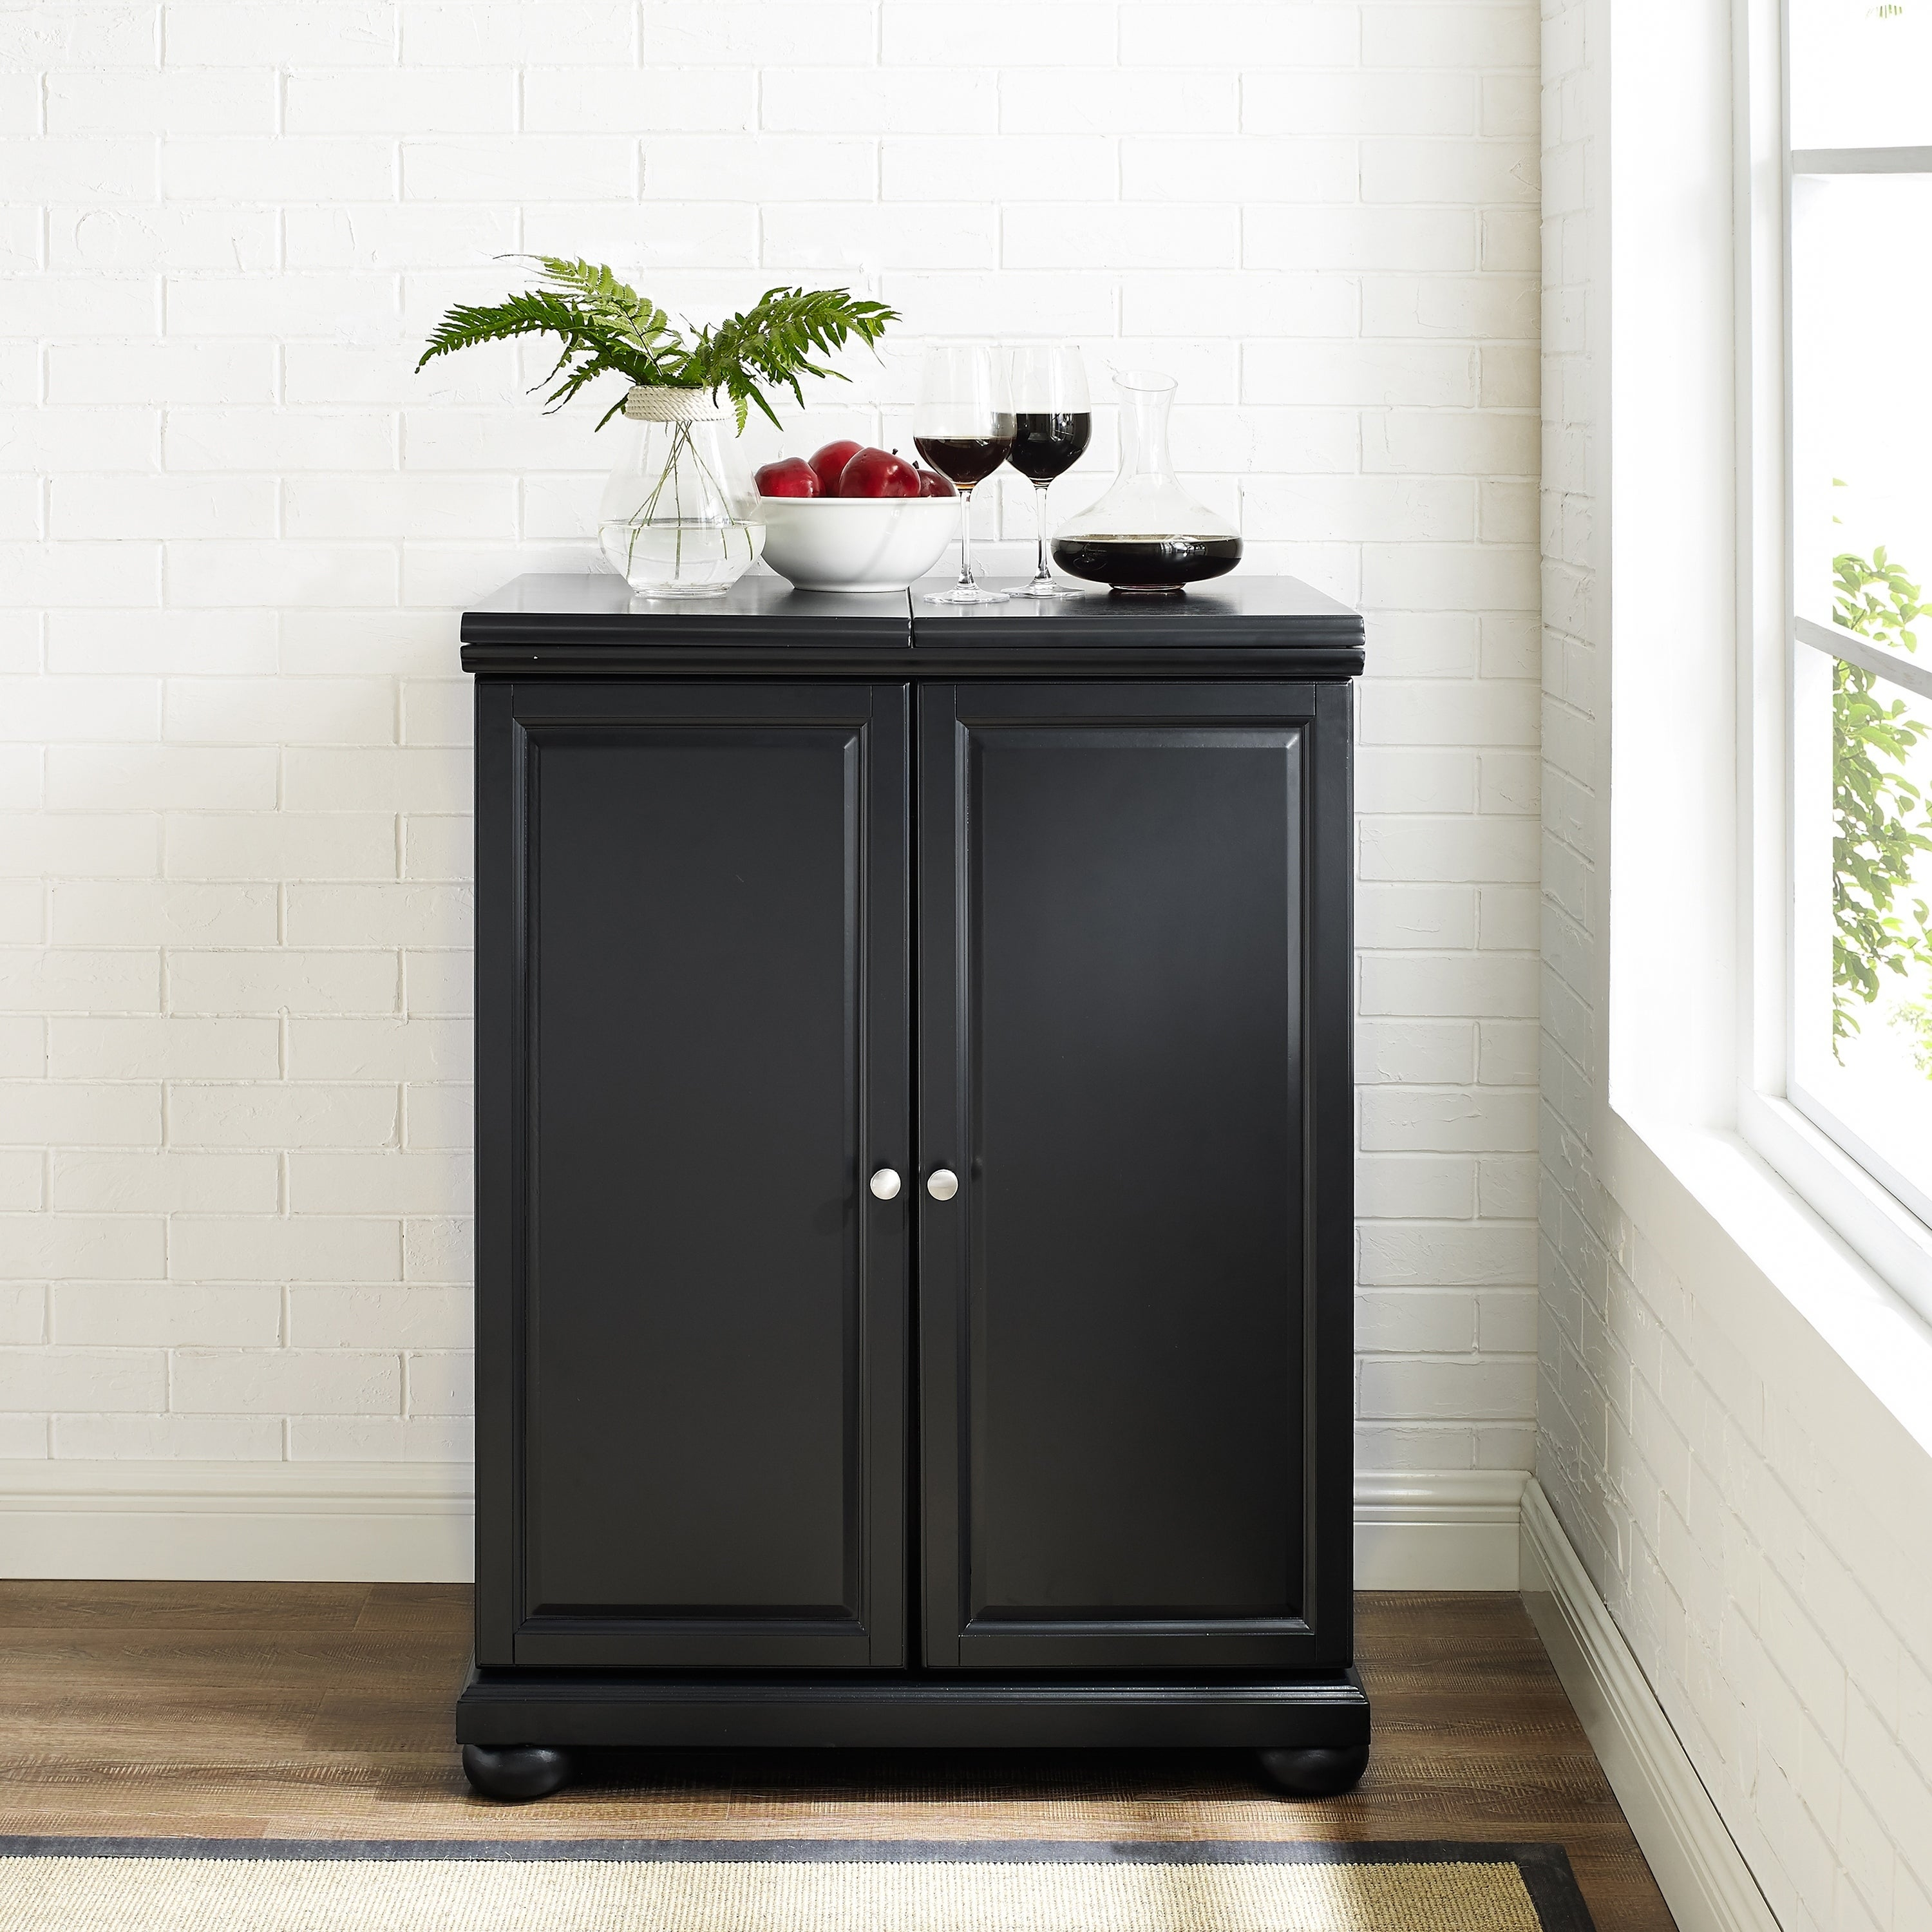 Alexandria Black Finish Expandable Bar Cabinet Na within dimensions 3000 X 3000